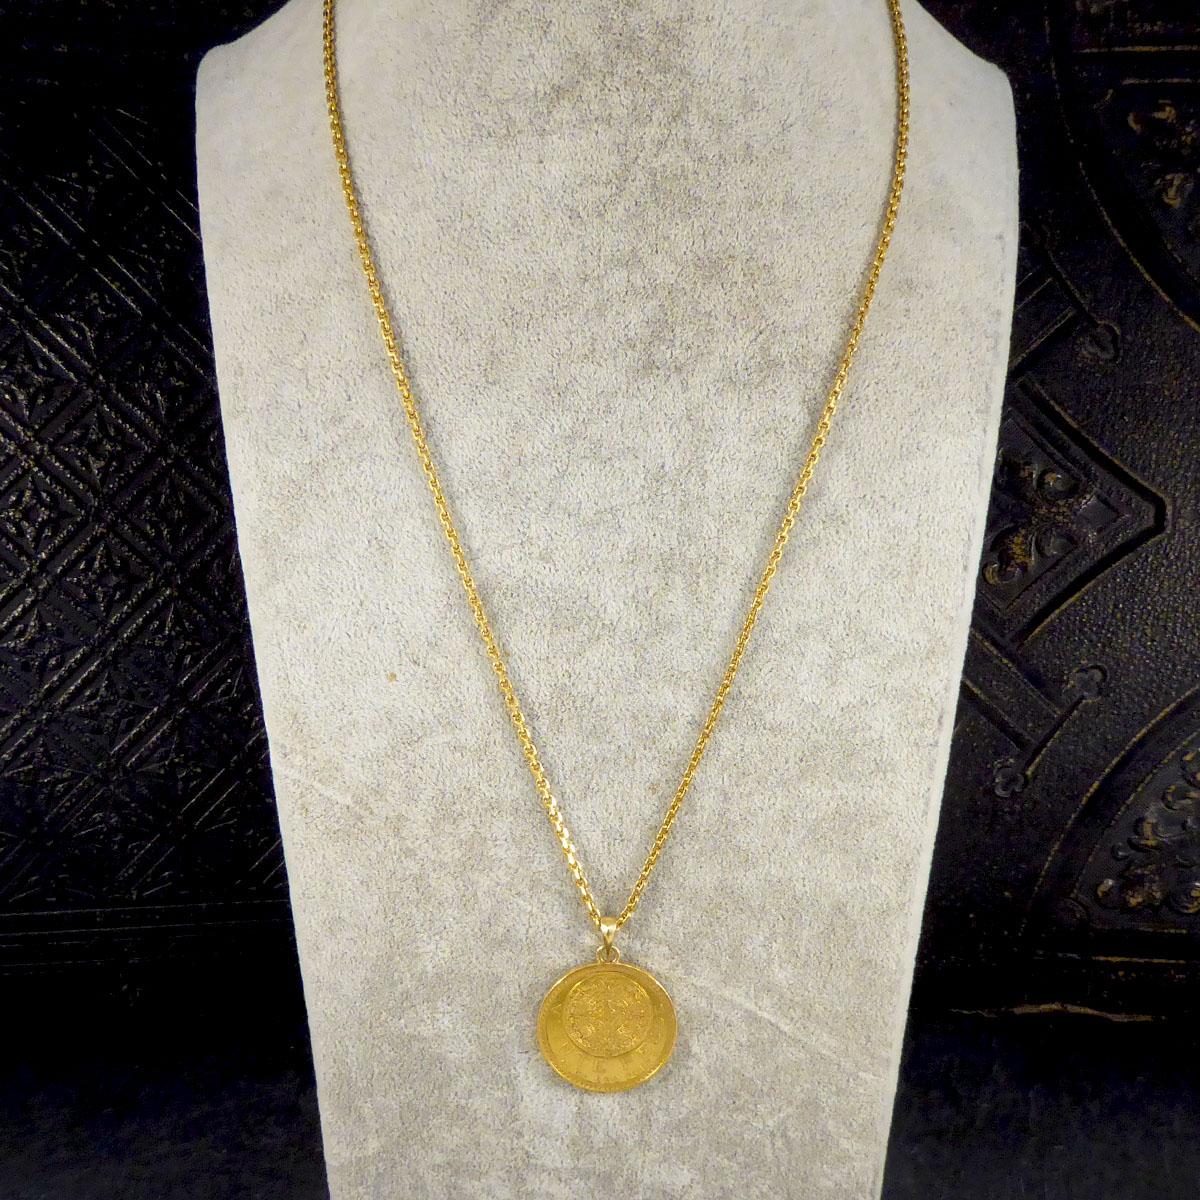 Mexican Pesos 21.6ct Gold Coin Unique Hidden Locket on 22ct Yellow Gold Chain 2